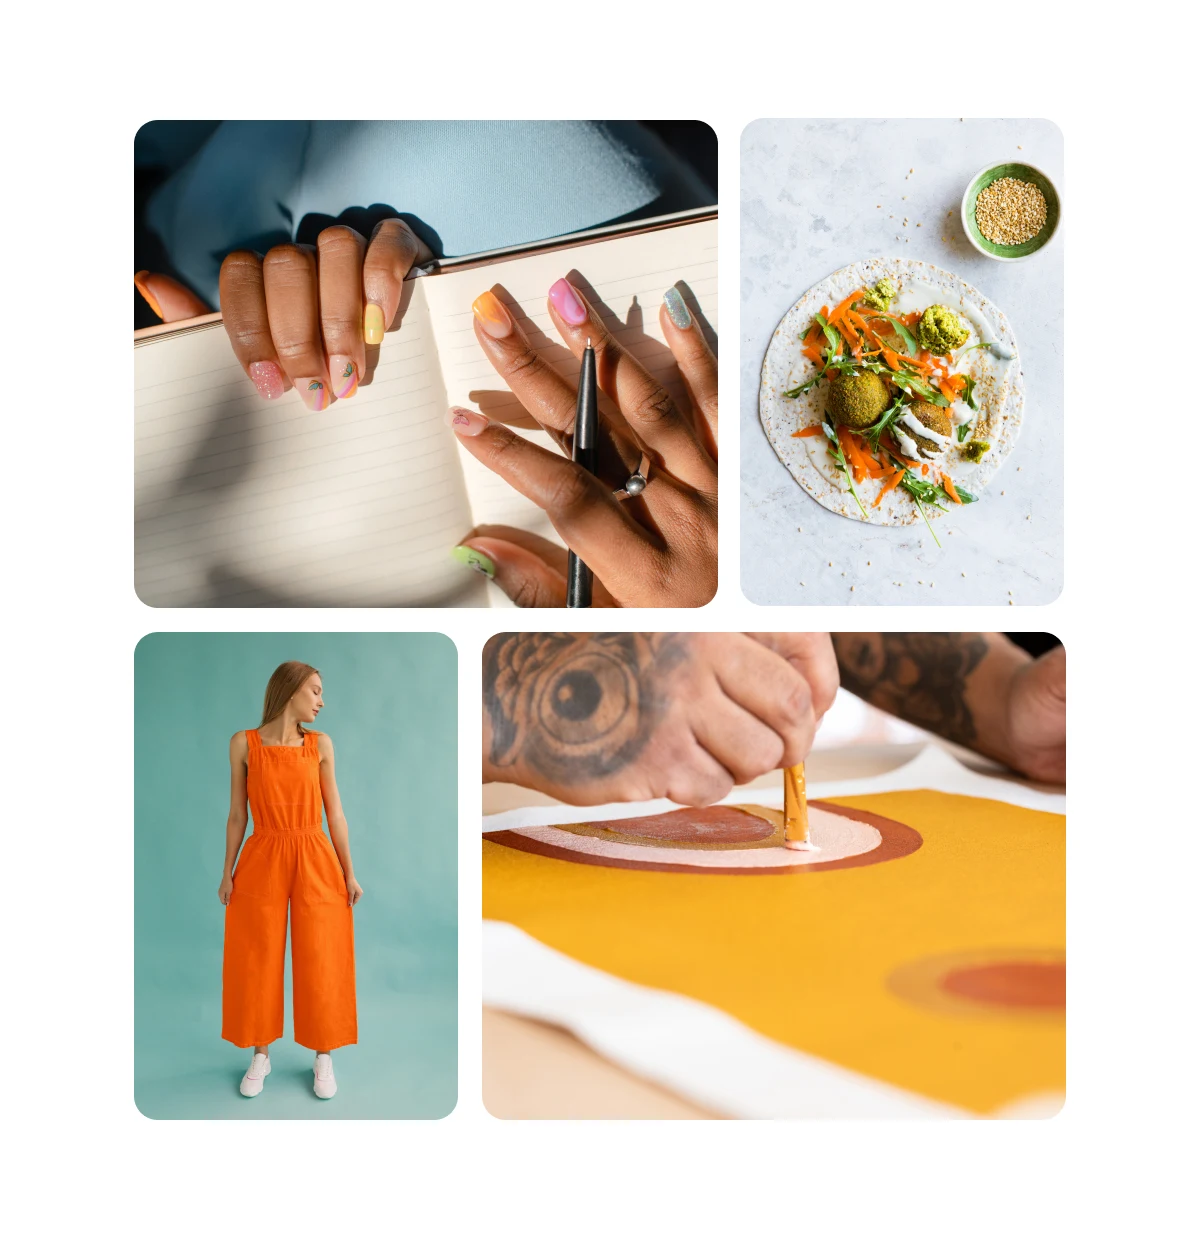 Grid of four images including journal prompts, healthy recipes, positive art projects, comfort outfits